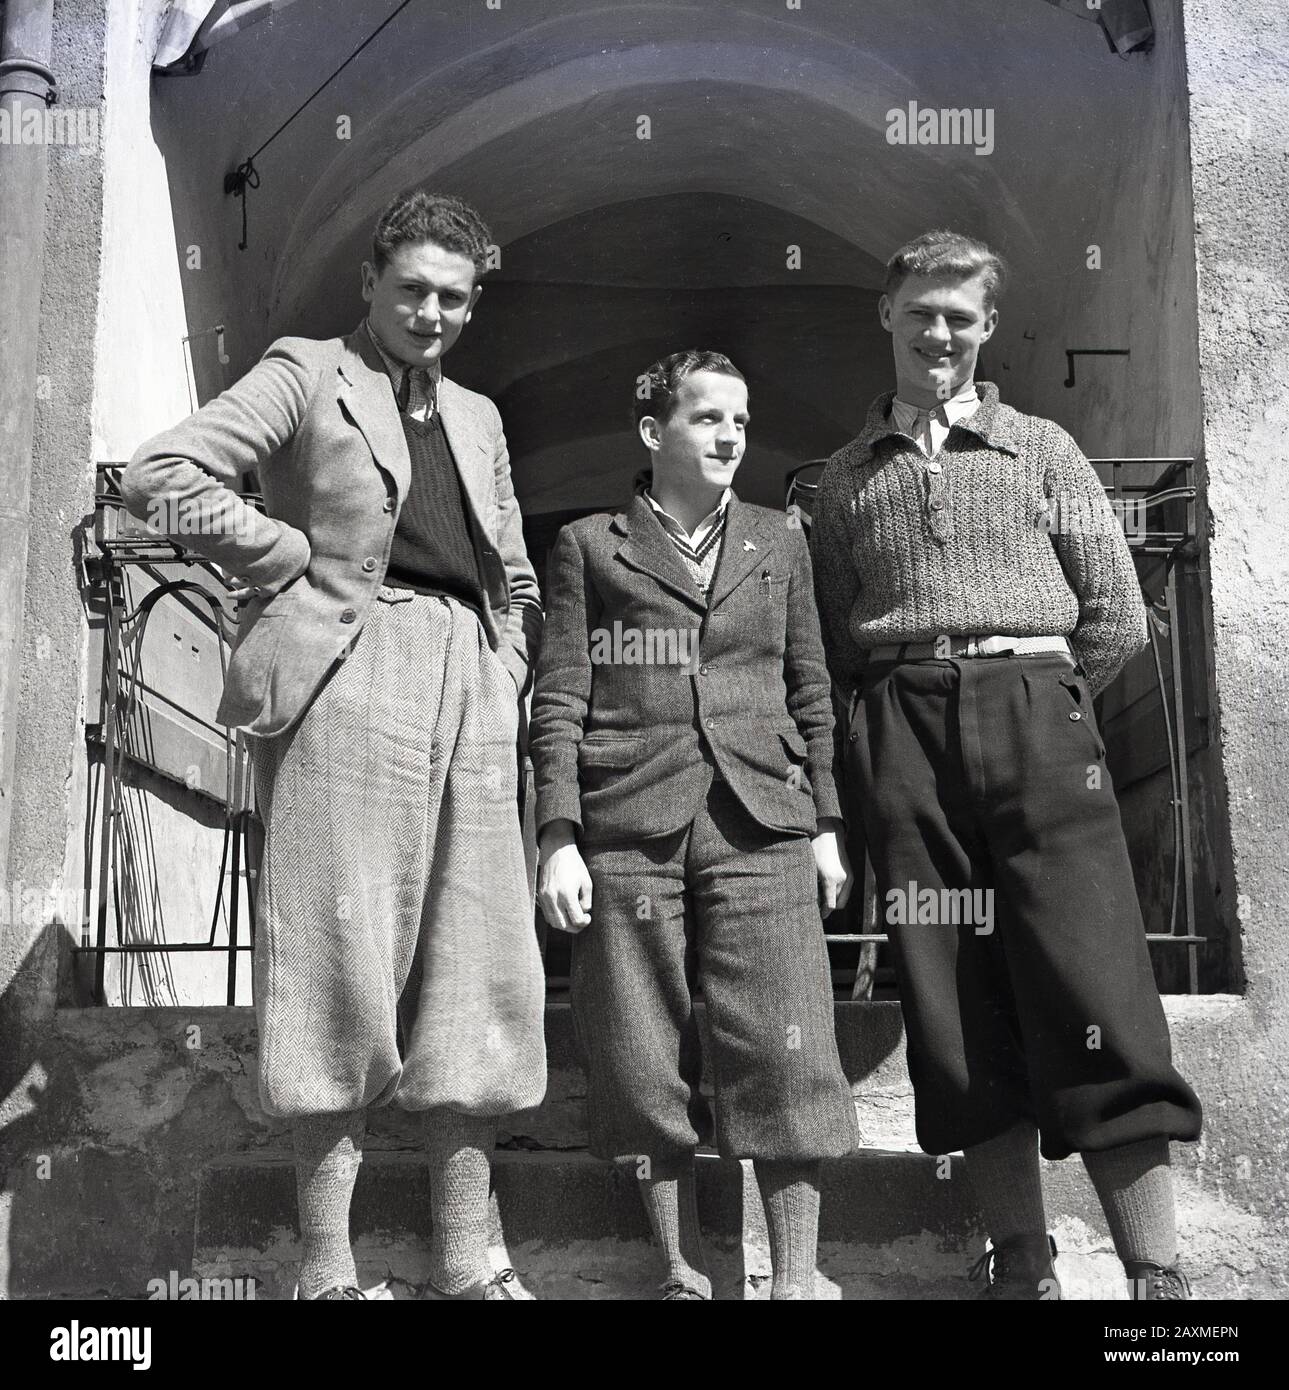 Late 1930s, historical picture of three young men in the fashionable male clothing of the era, woollen plus fours. Also known as breeches, the trousers extended a few inches below the knee and could be worn with either a jacket or sweater. Stock Photo